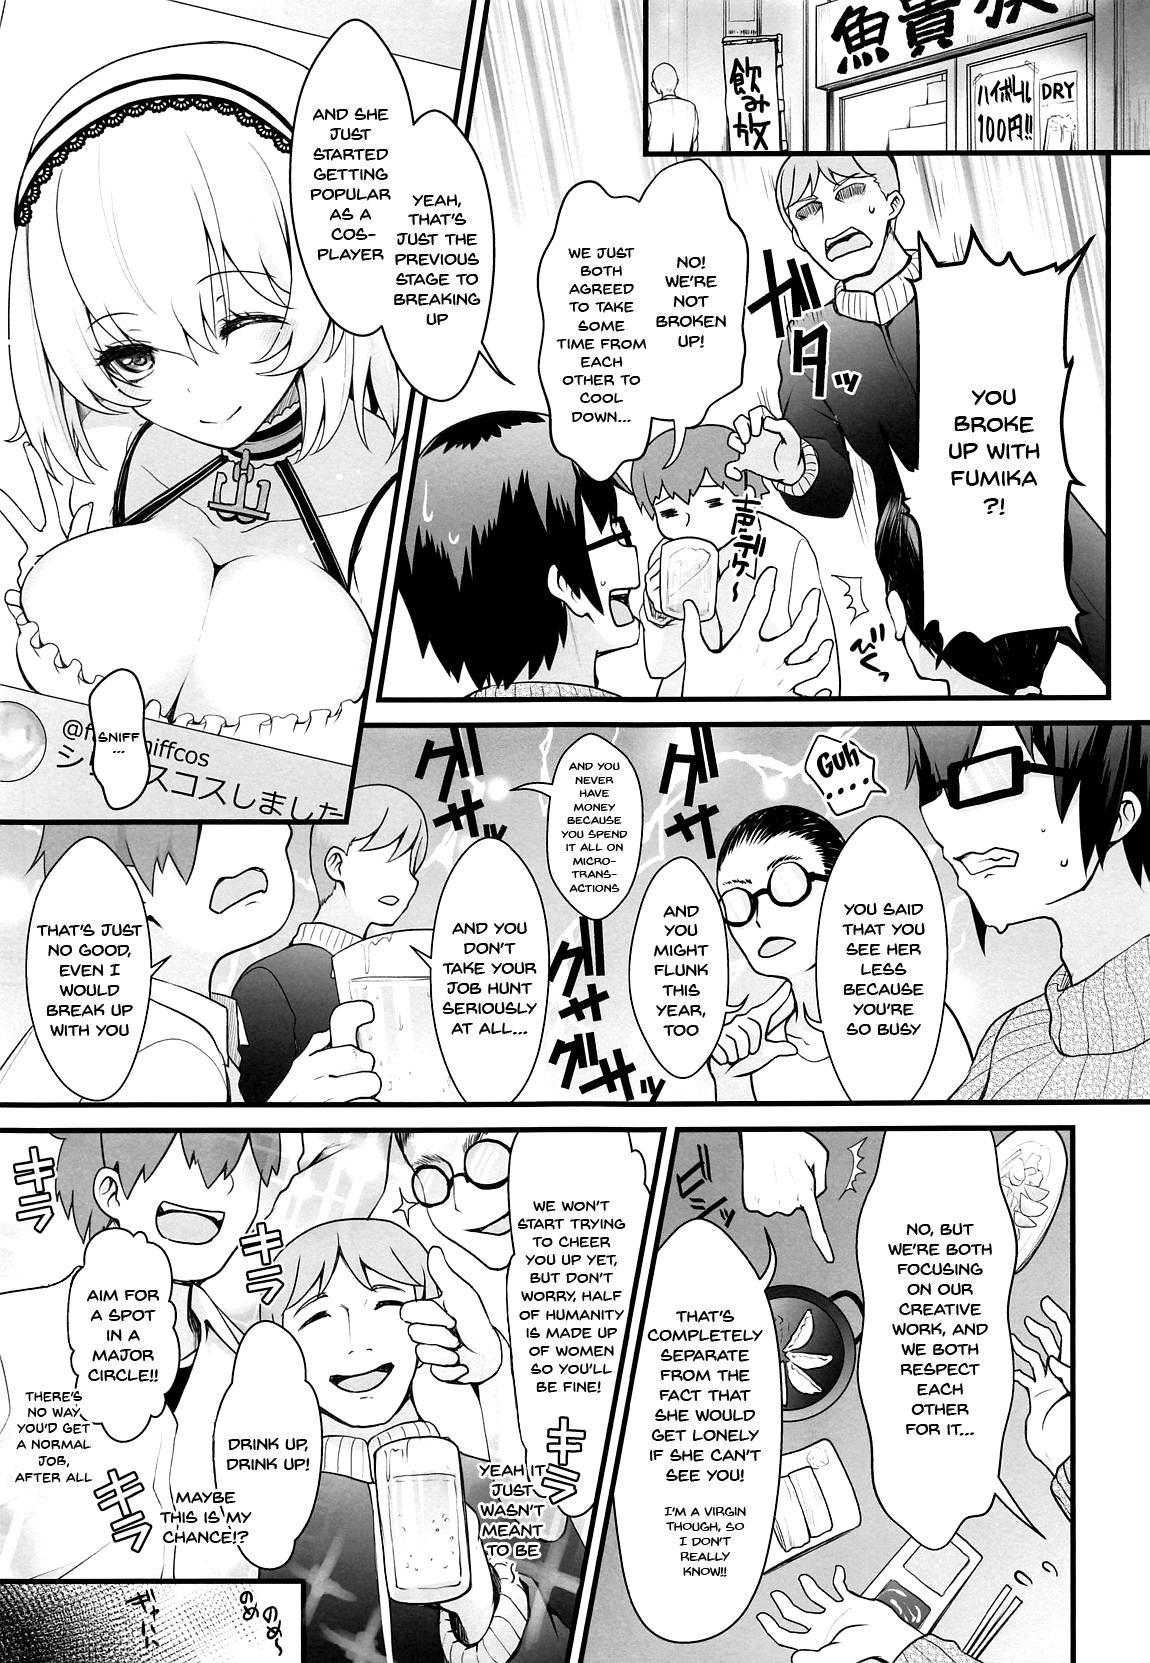 Indoor (COMIC1☆15) [SSB (Maririn)] Purupuru Yurasu H-Cup Namachichi Hobo Marudashi Layer Icha Love Rojou CosEve Date | making love to a cosplayer with large swaying h-cup breasts at a cosplay event (Fate/Grand Order) [English] {Doujins.com} - Fate gr - Page 4